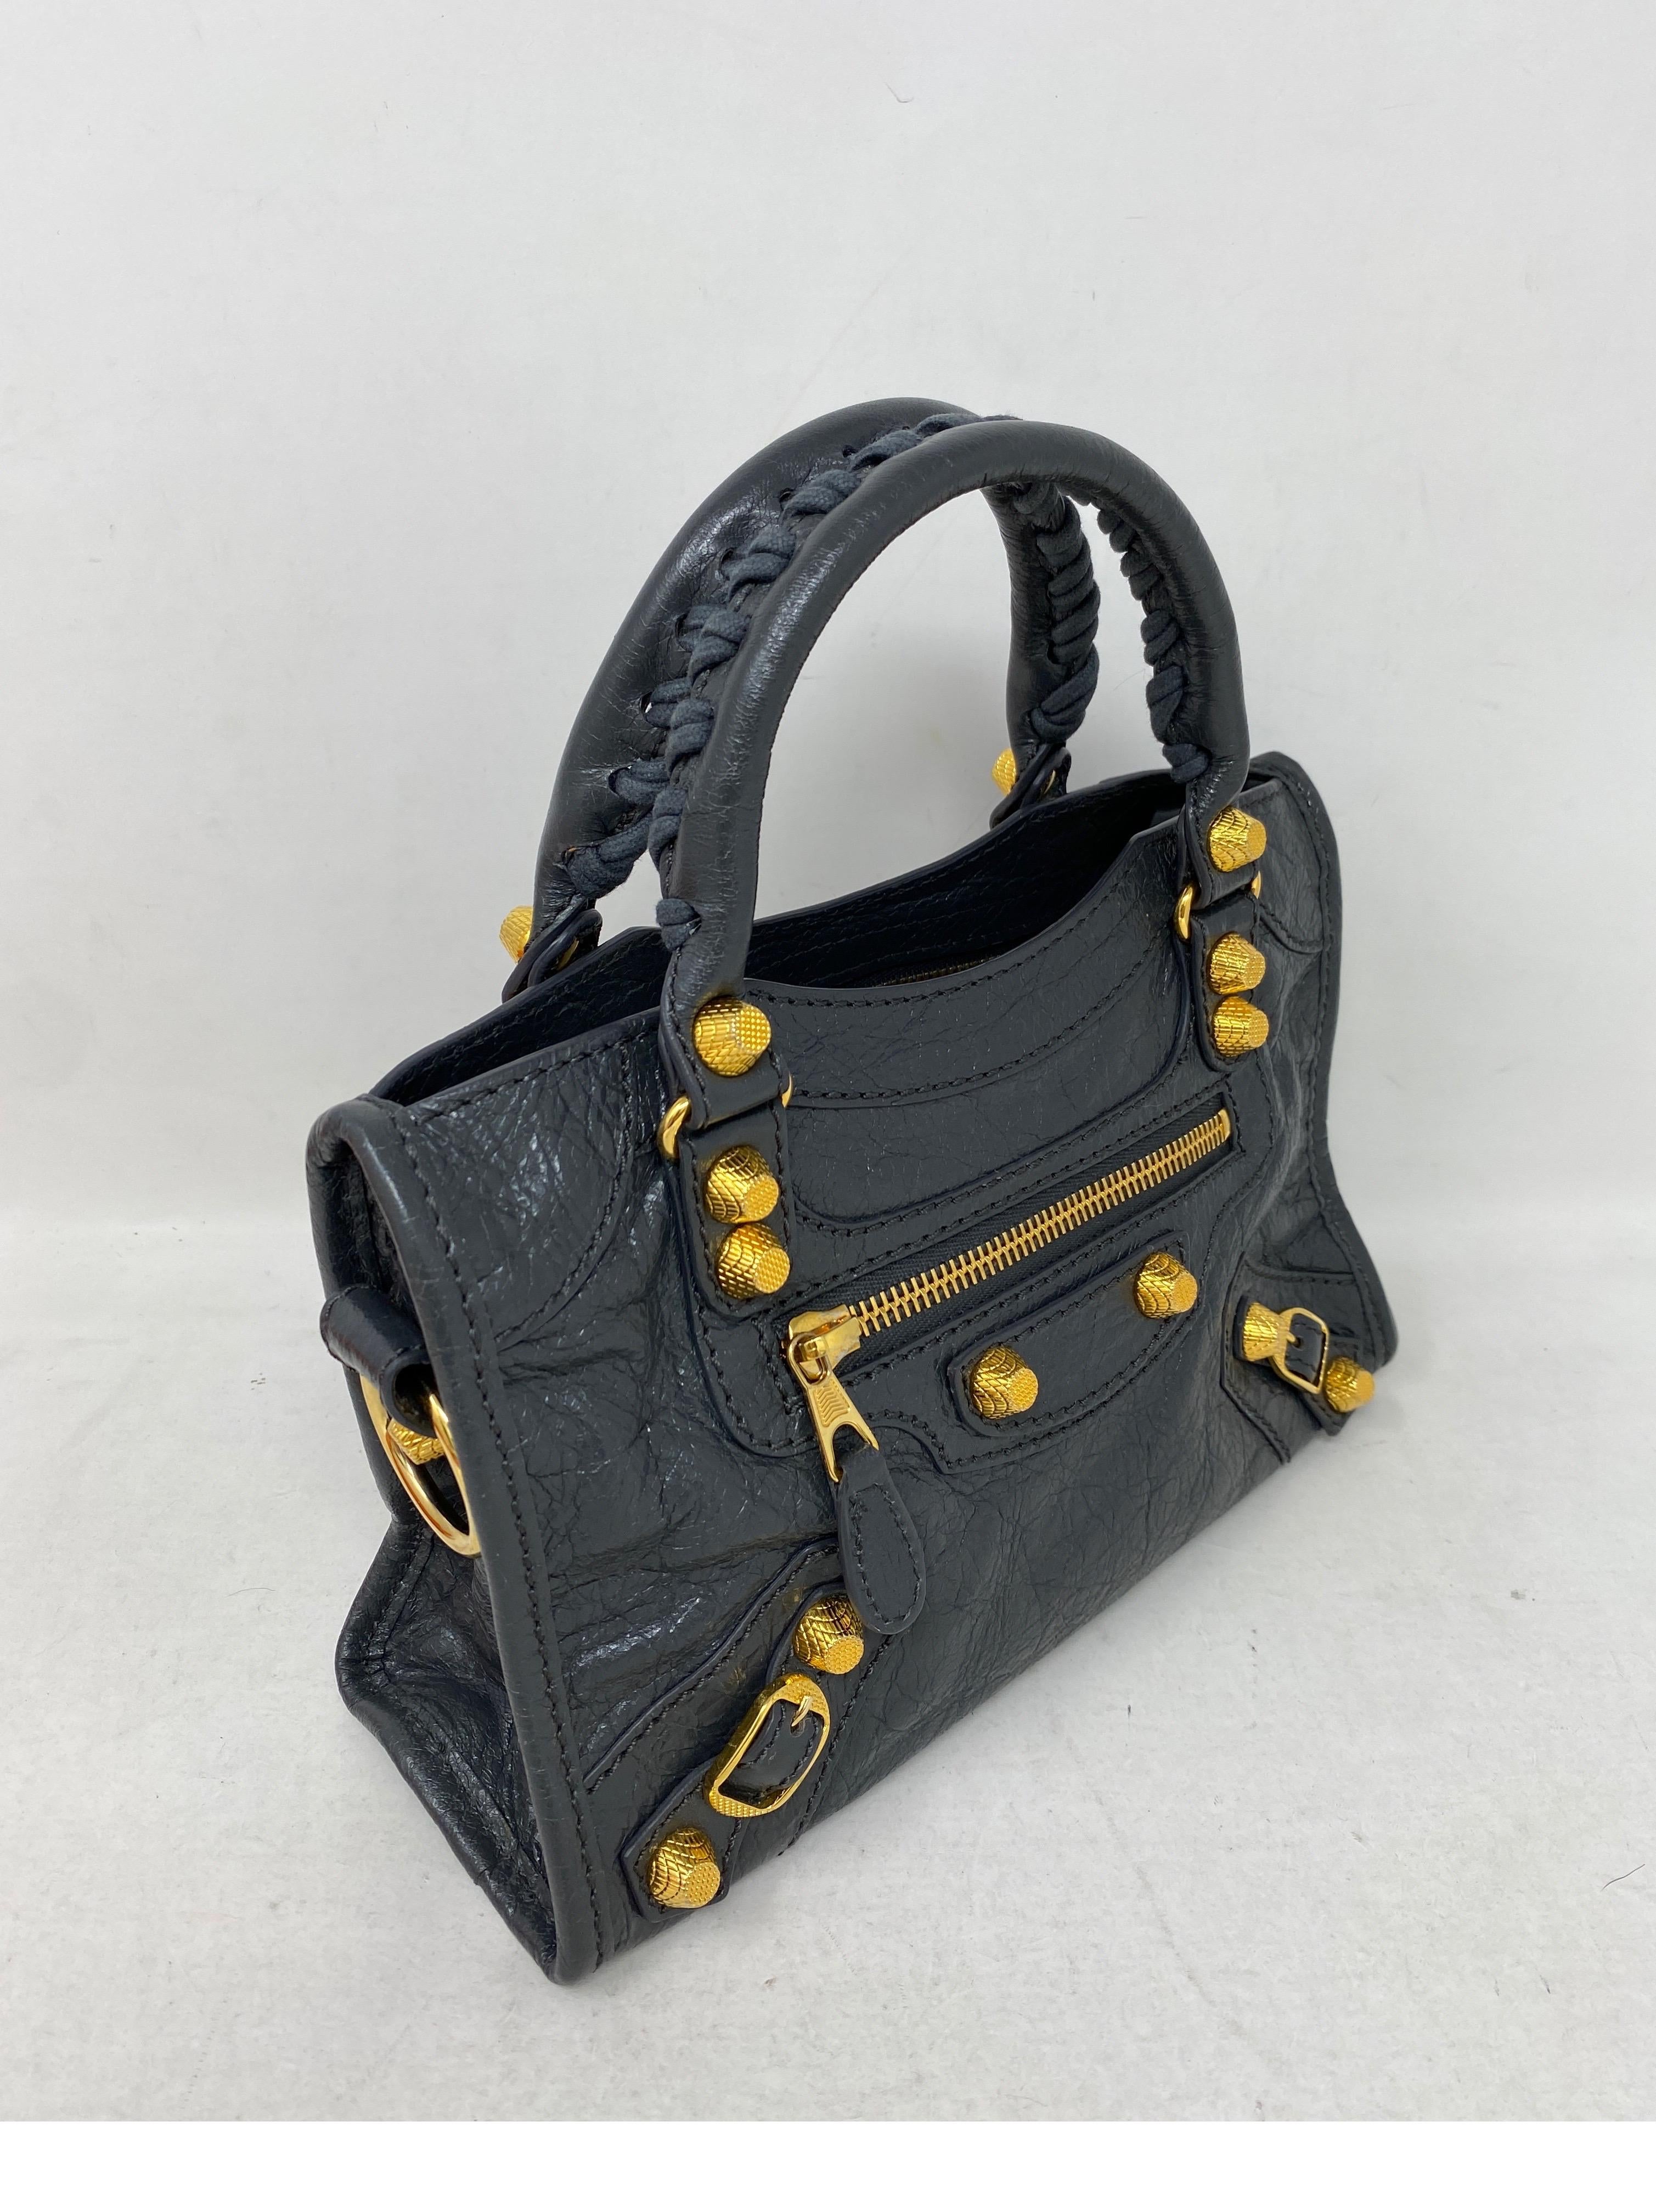 Balenciaga City Mini Bag. Dark grey/ black mini leather bag. Super cute style. Gold studded details. Excellent like new condition. Guaranteed authentic. 